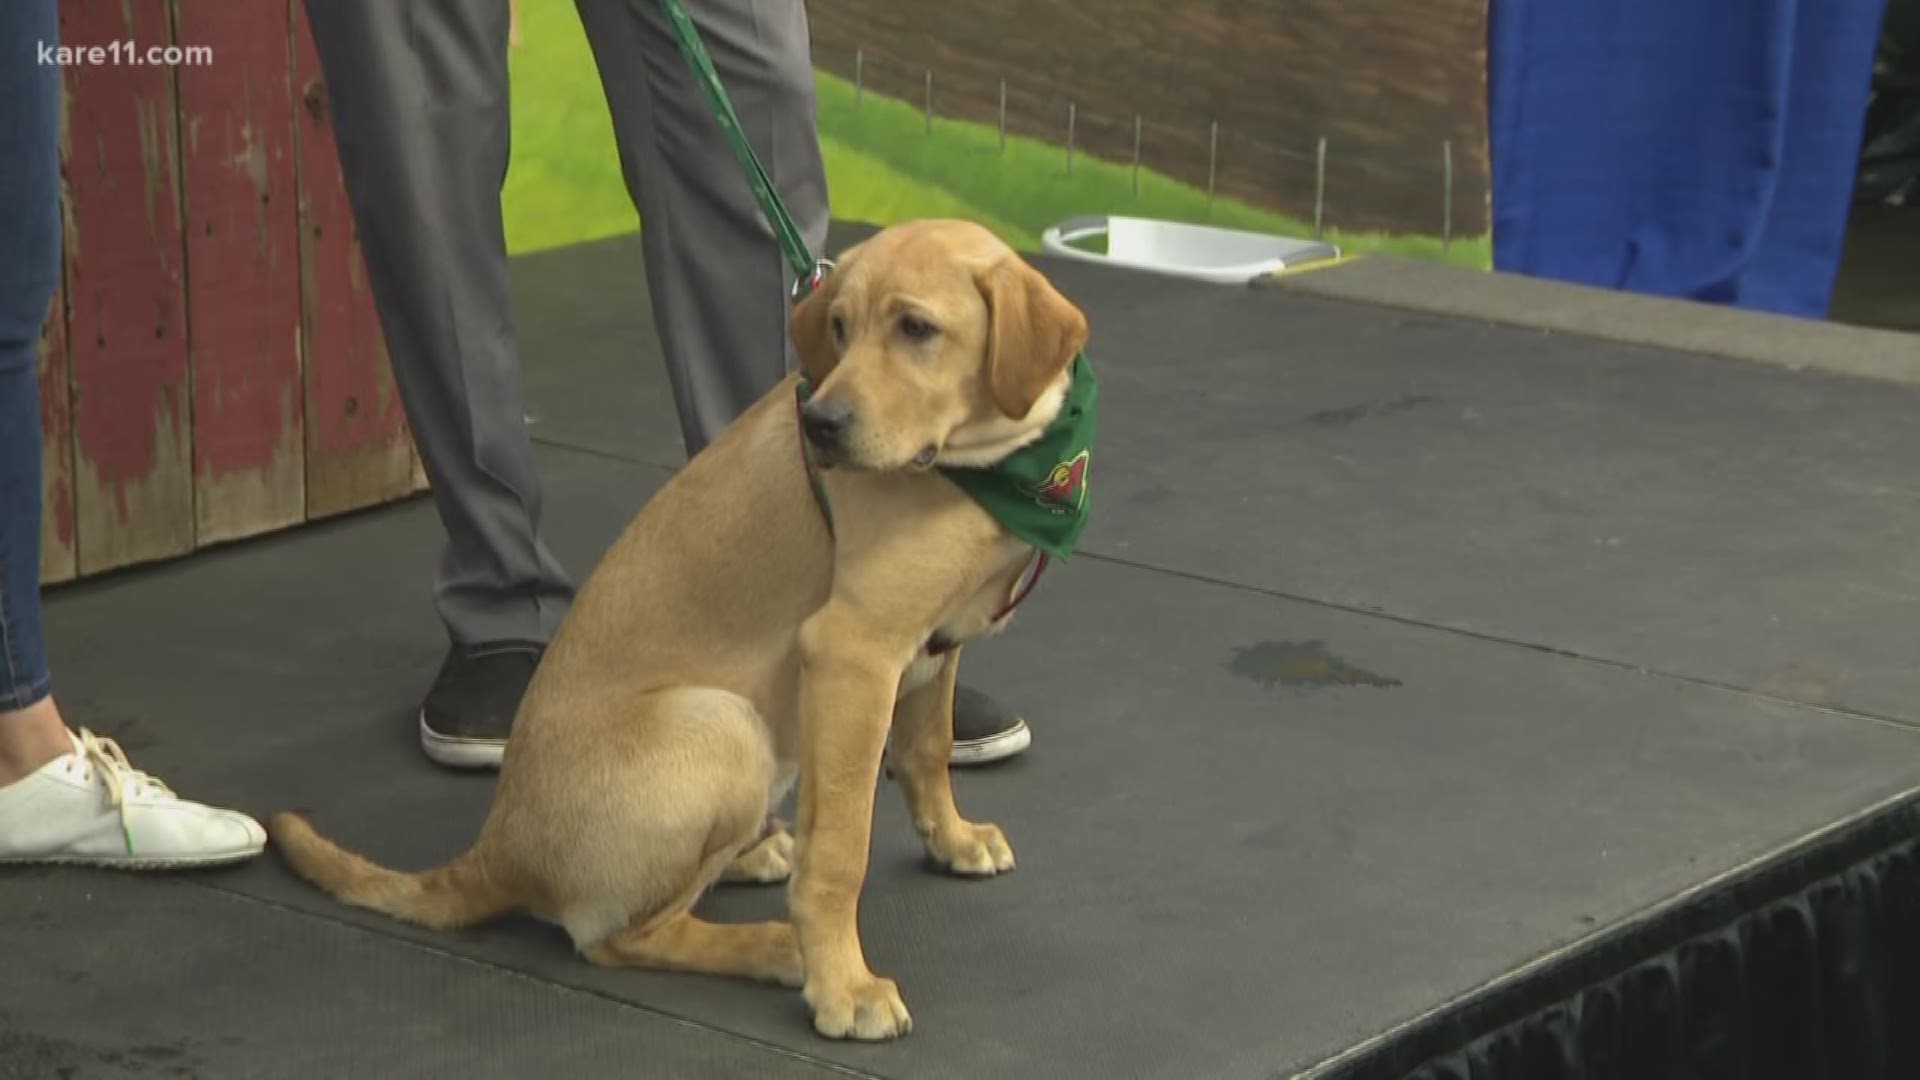 The Minnesota Wild’s newest off-season acquisition, Breezer, stopped by the KARE 11 fair booth on National Dog Day to discuss his new role and the upcoming 2019-20 Wild season.